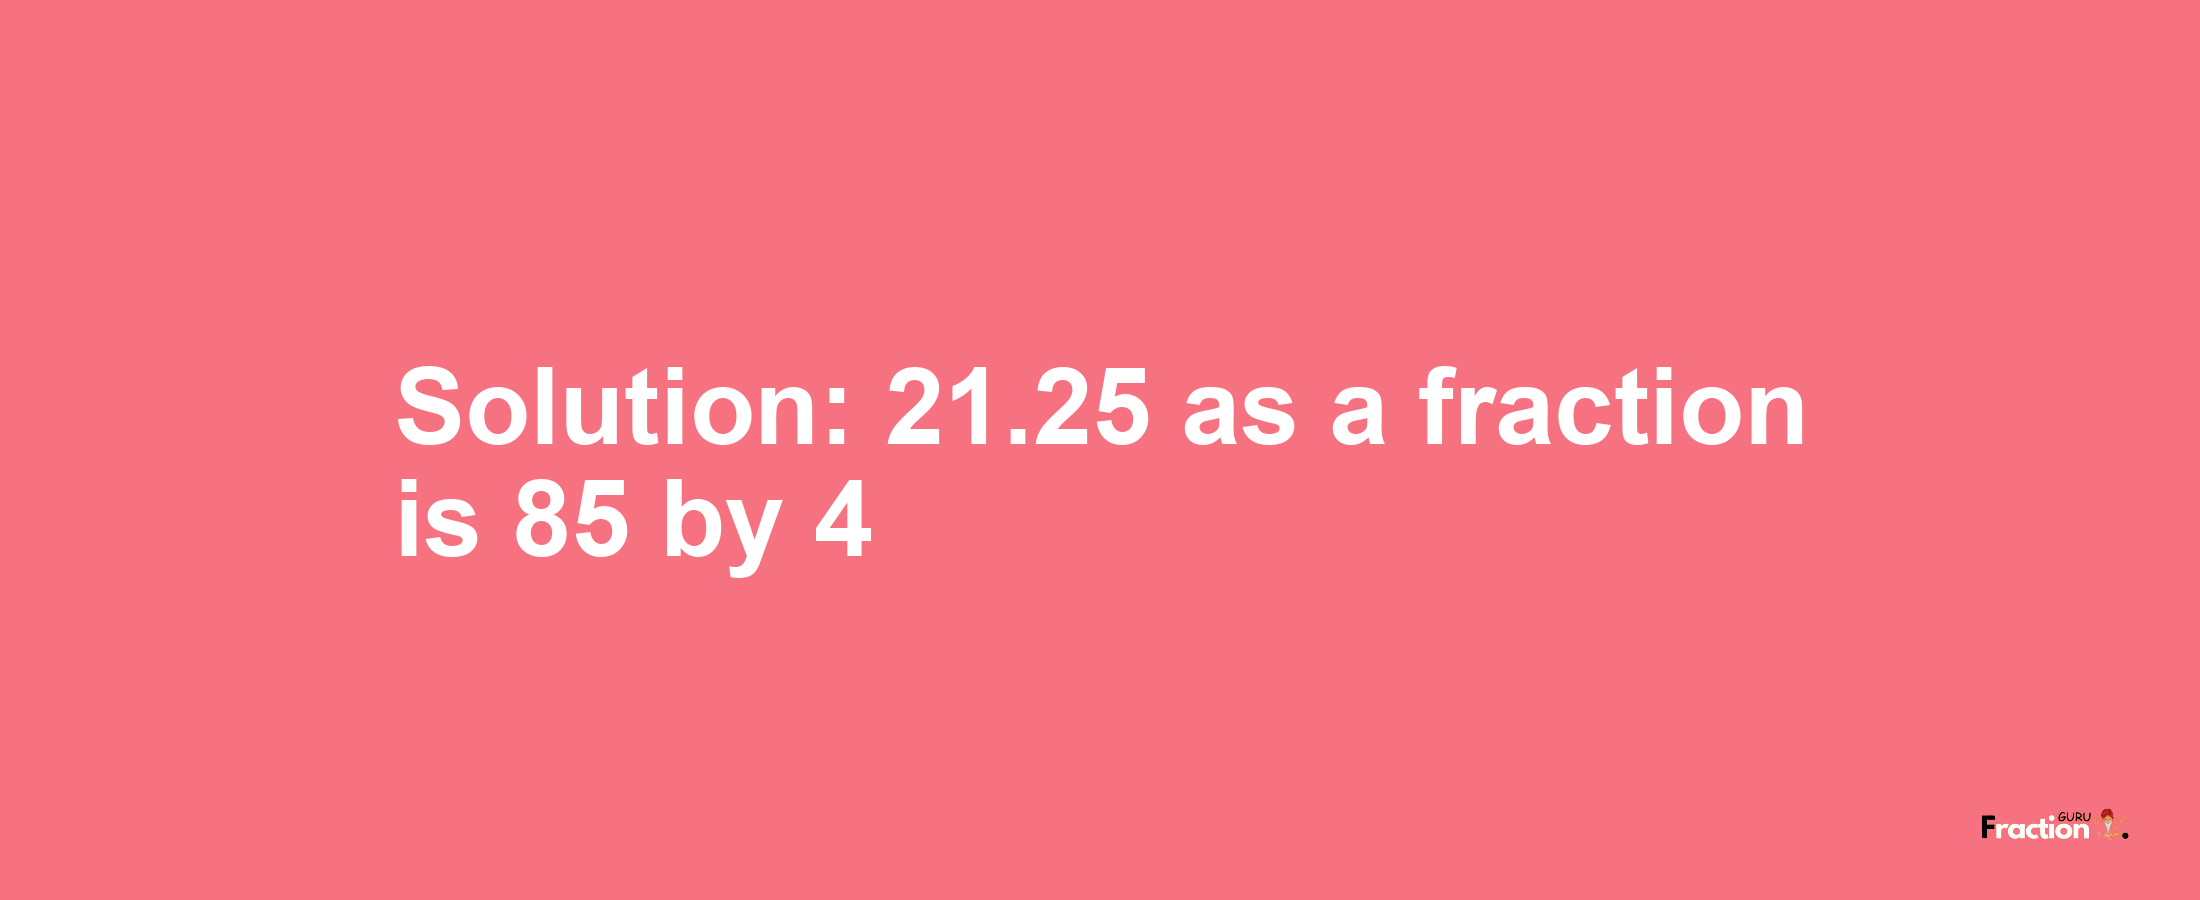 Solution:21.25 as a fraction is 85/4